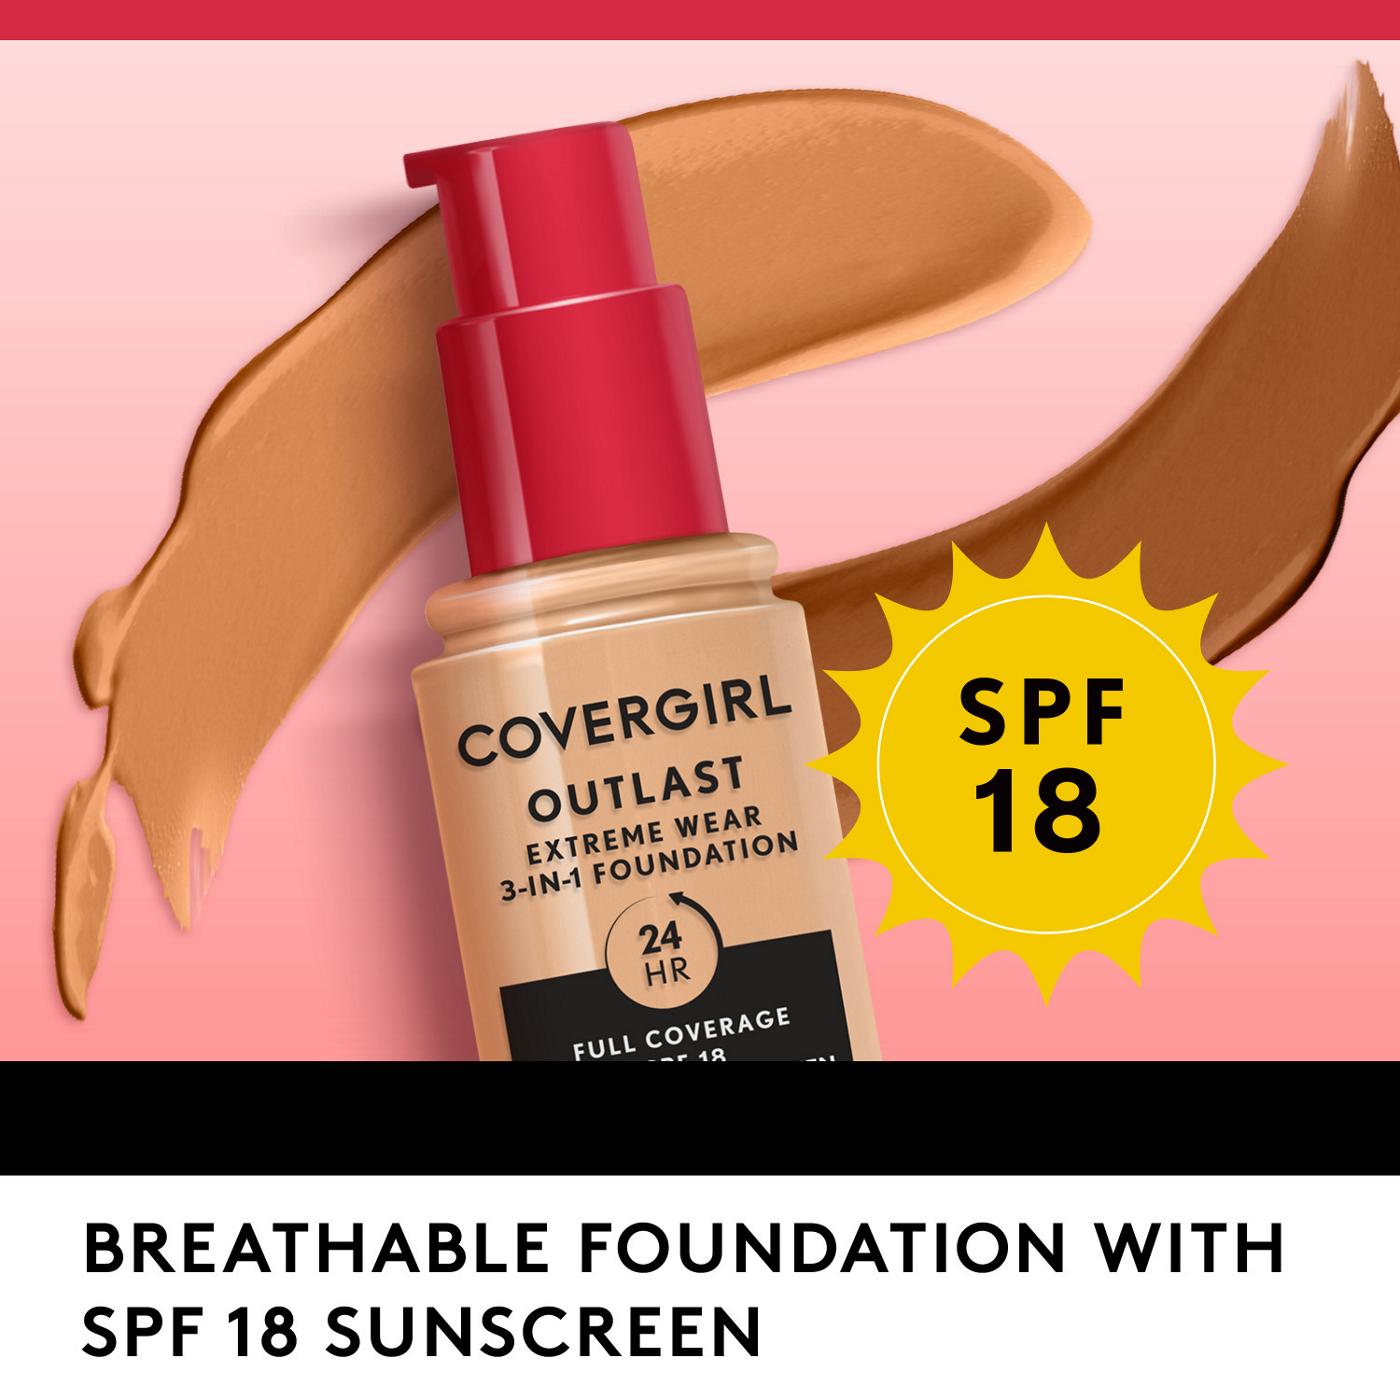 Covergirl Outlast Extreme Wear Liquid Foundation 802 Golden Ivory; image 7 of 11